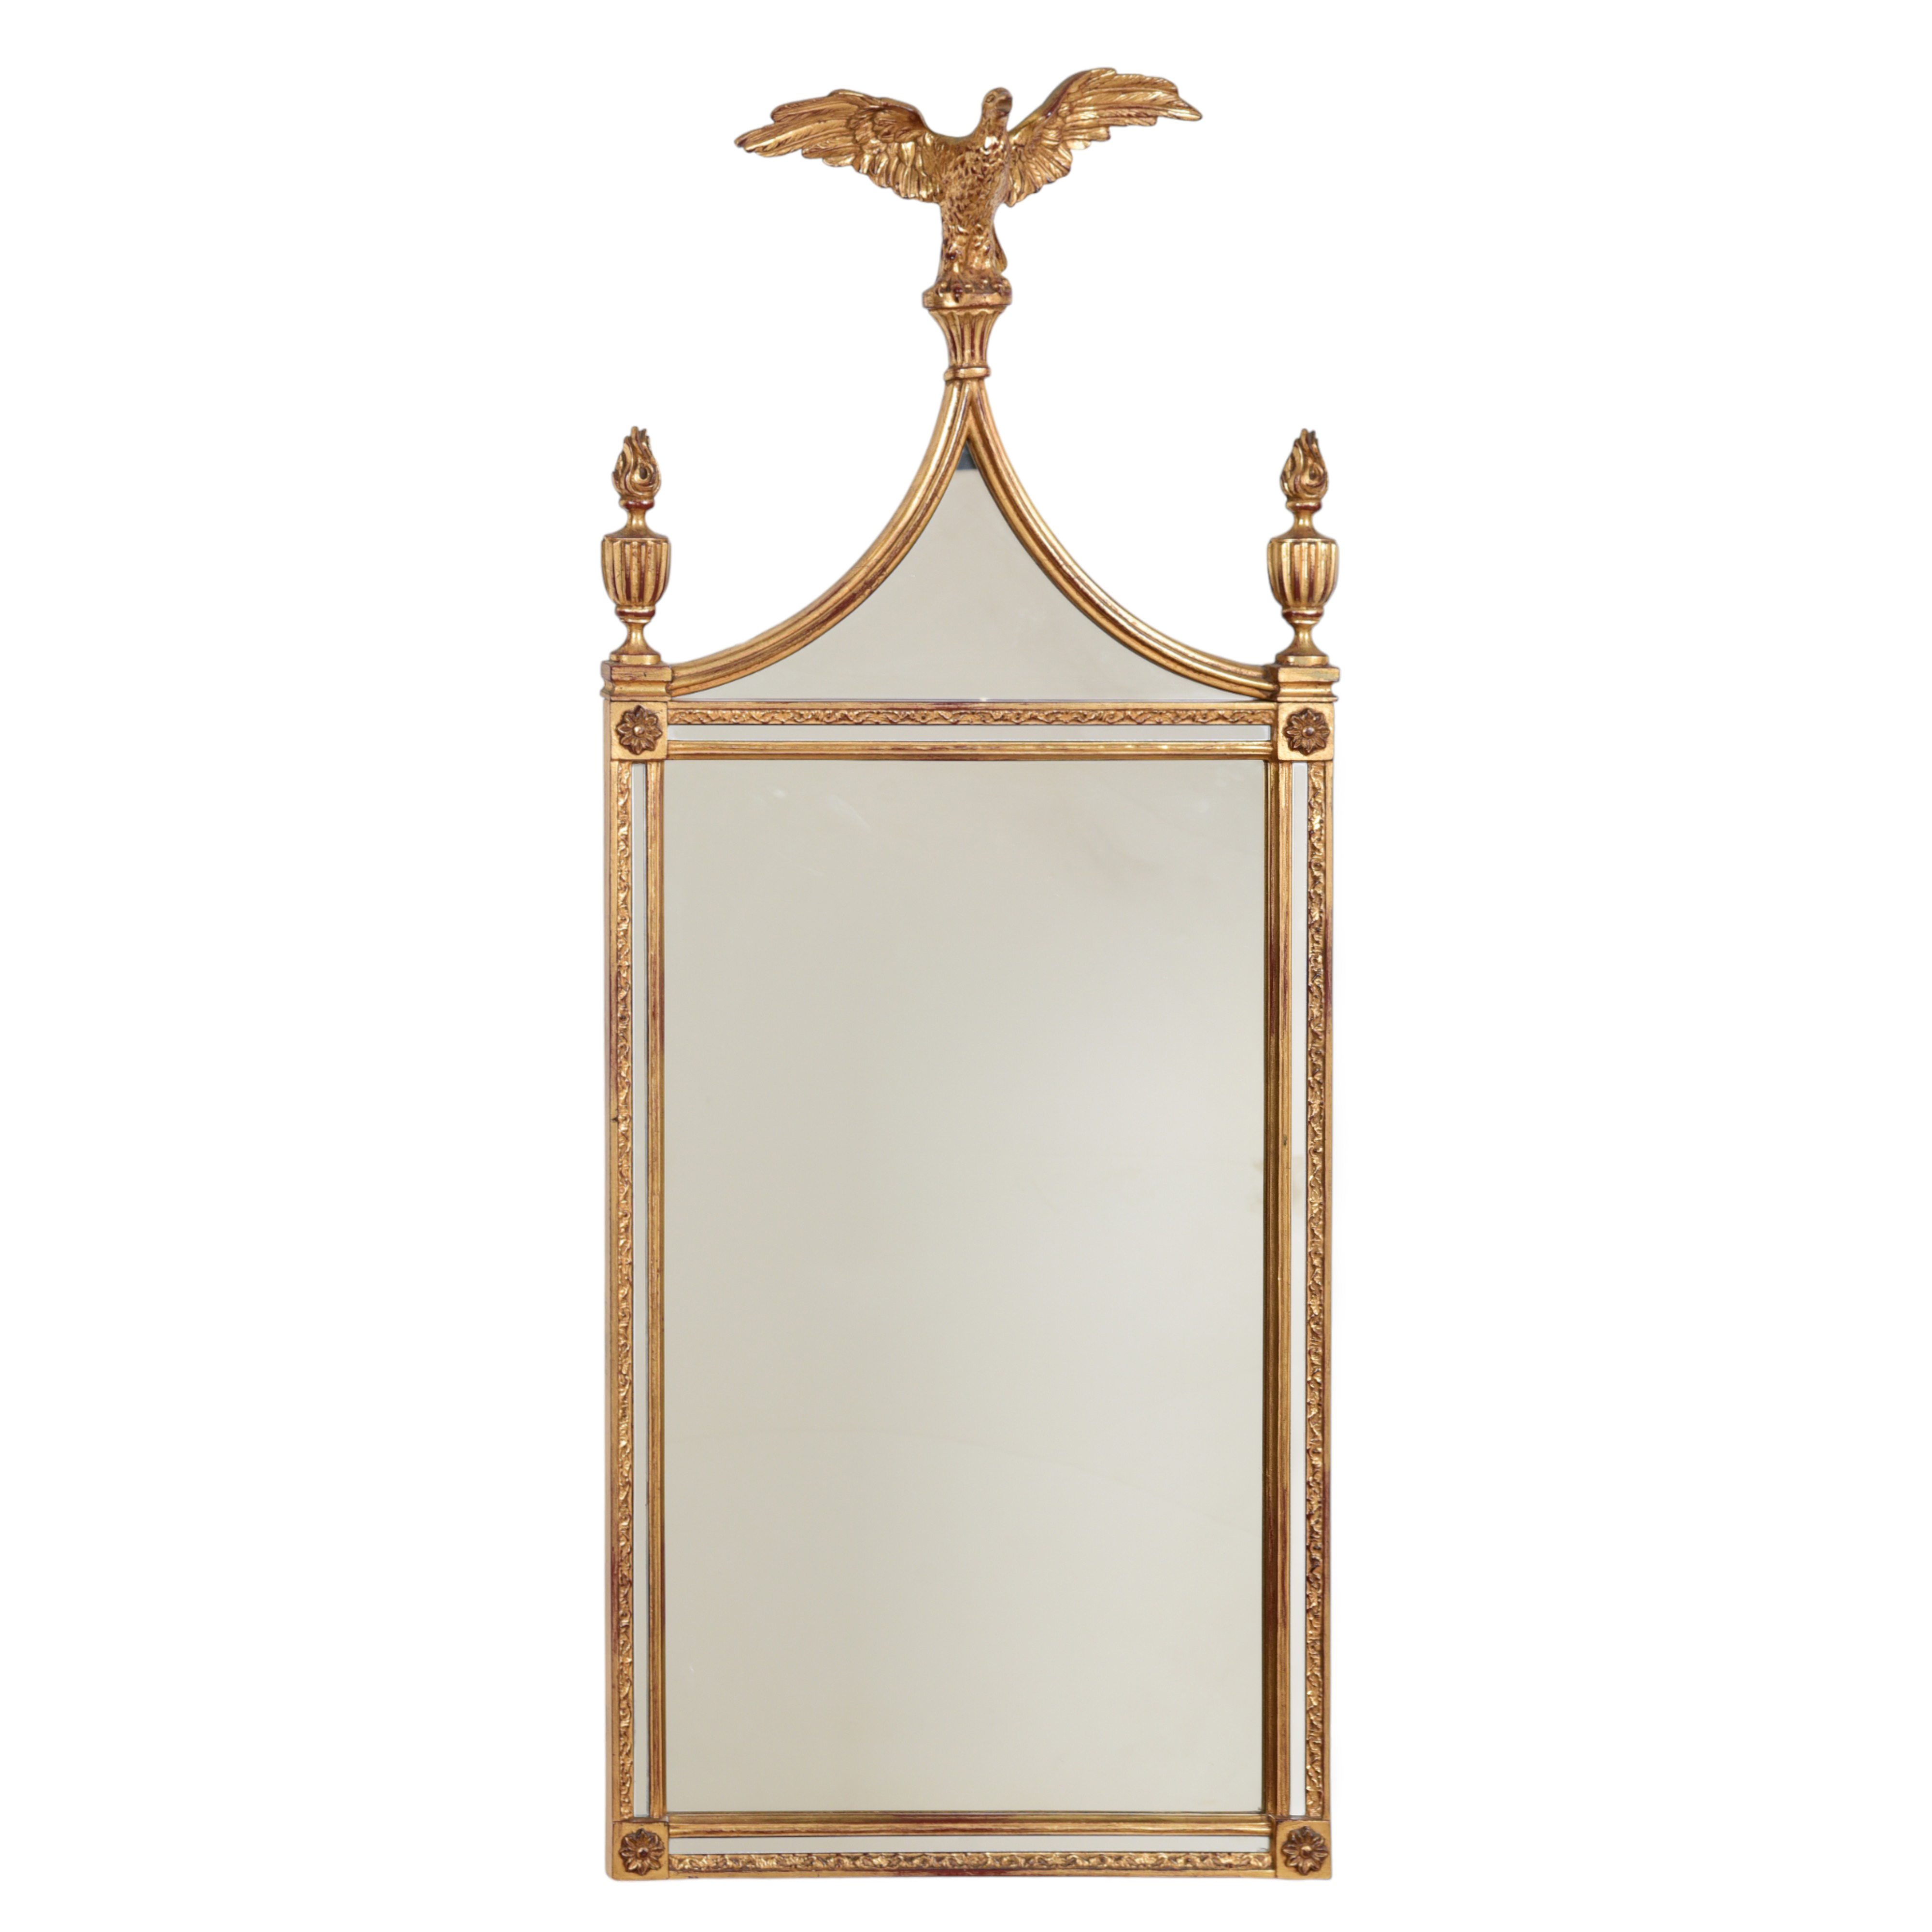 Federal style wall mirror, with